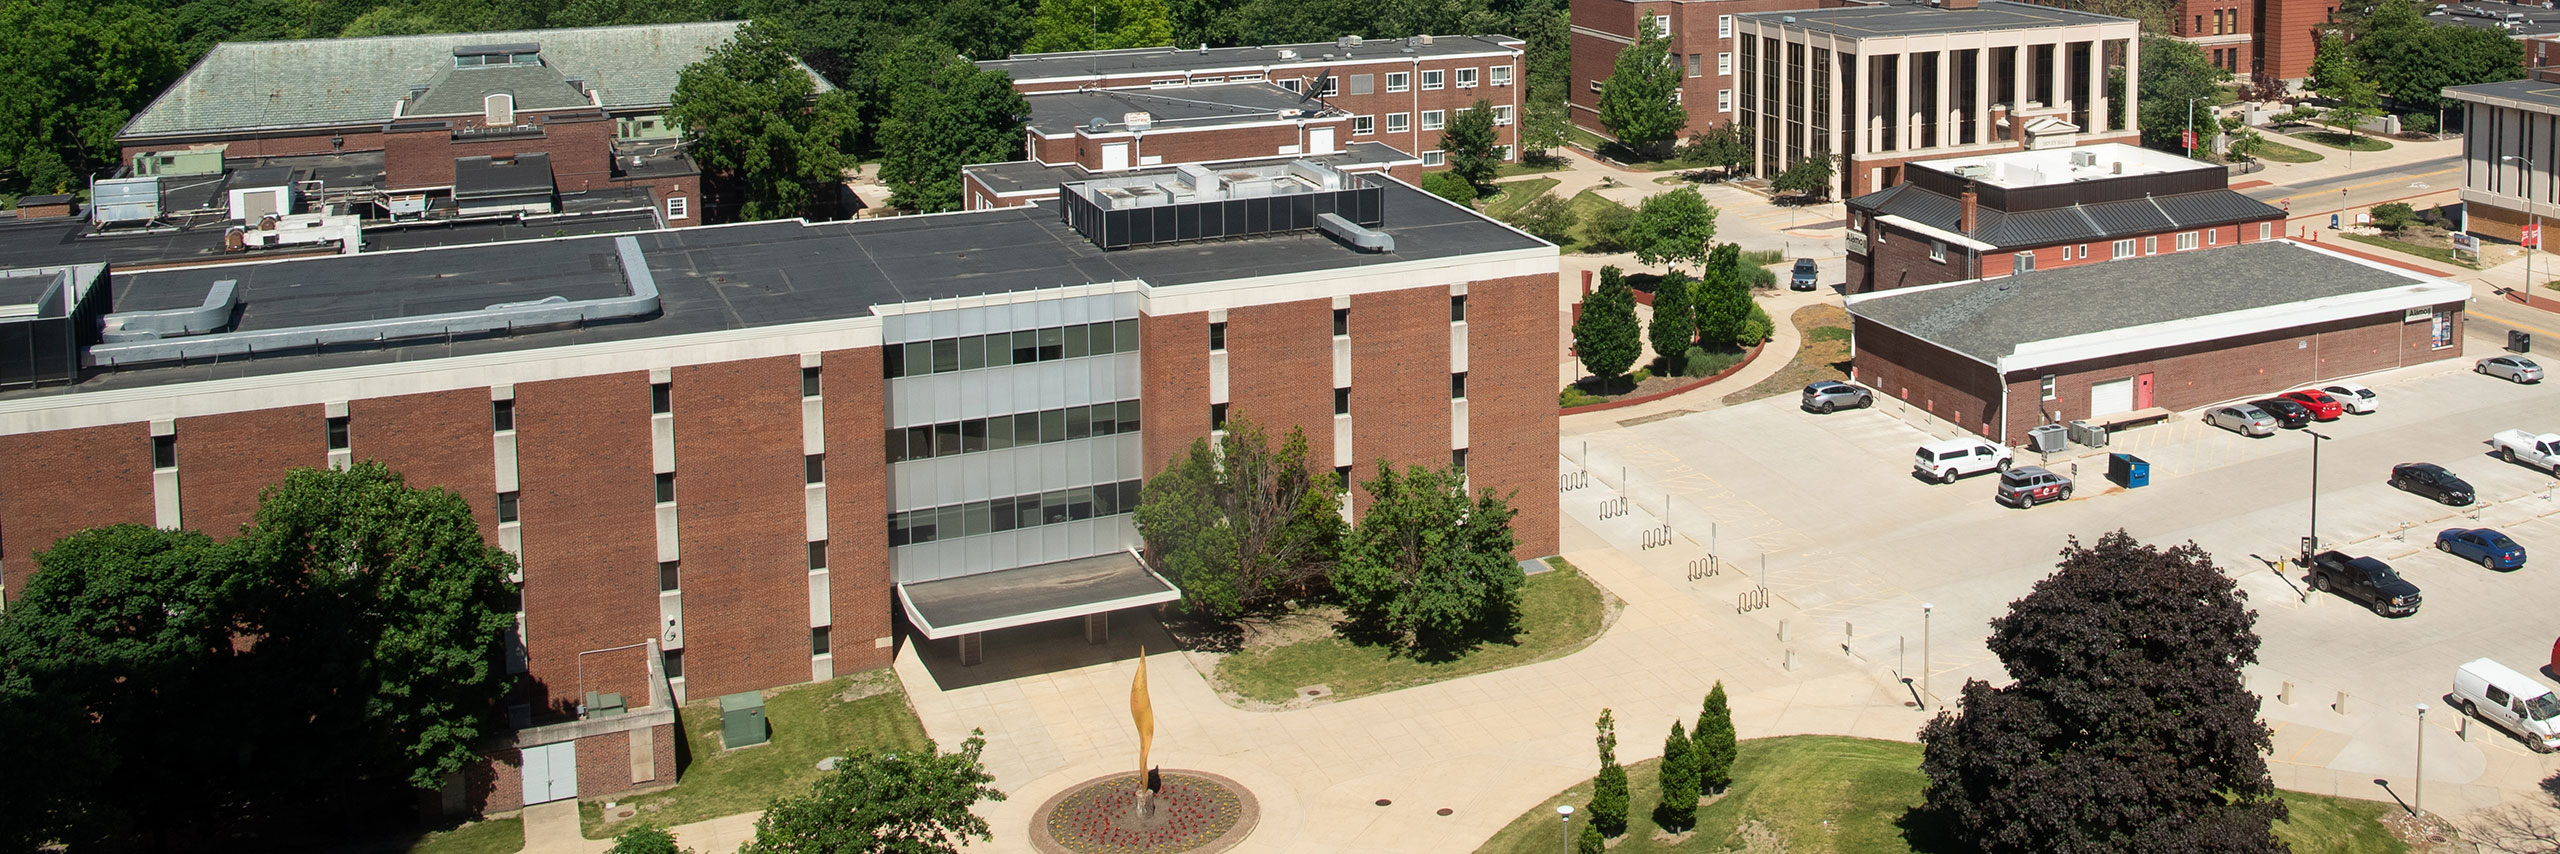 Aerial image of the Stevenson Hall Building.